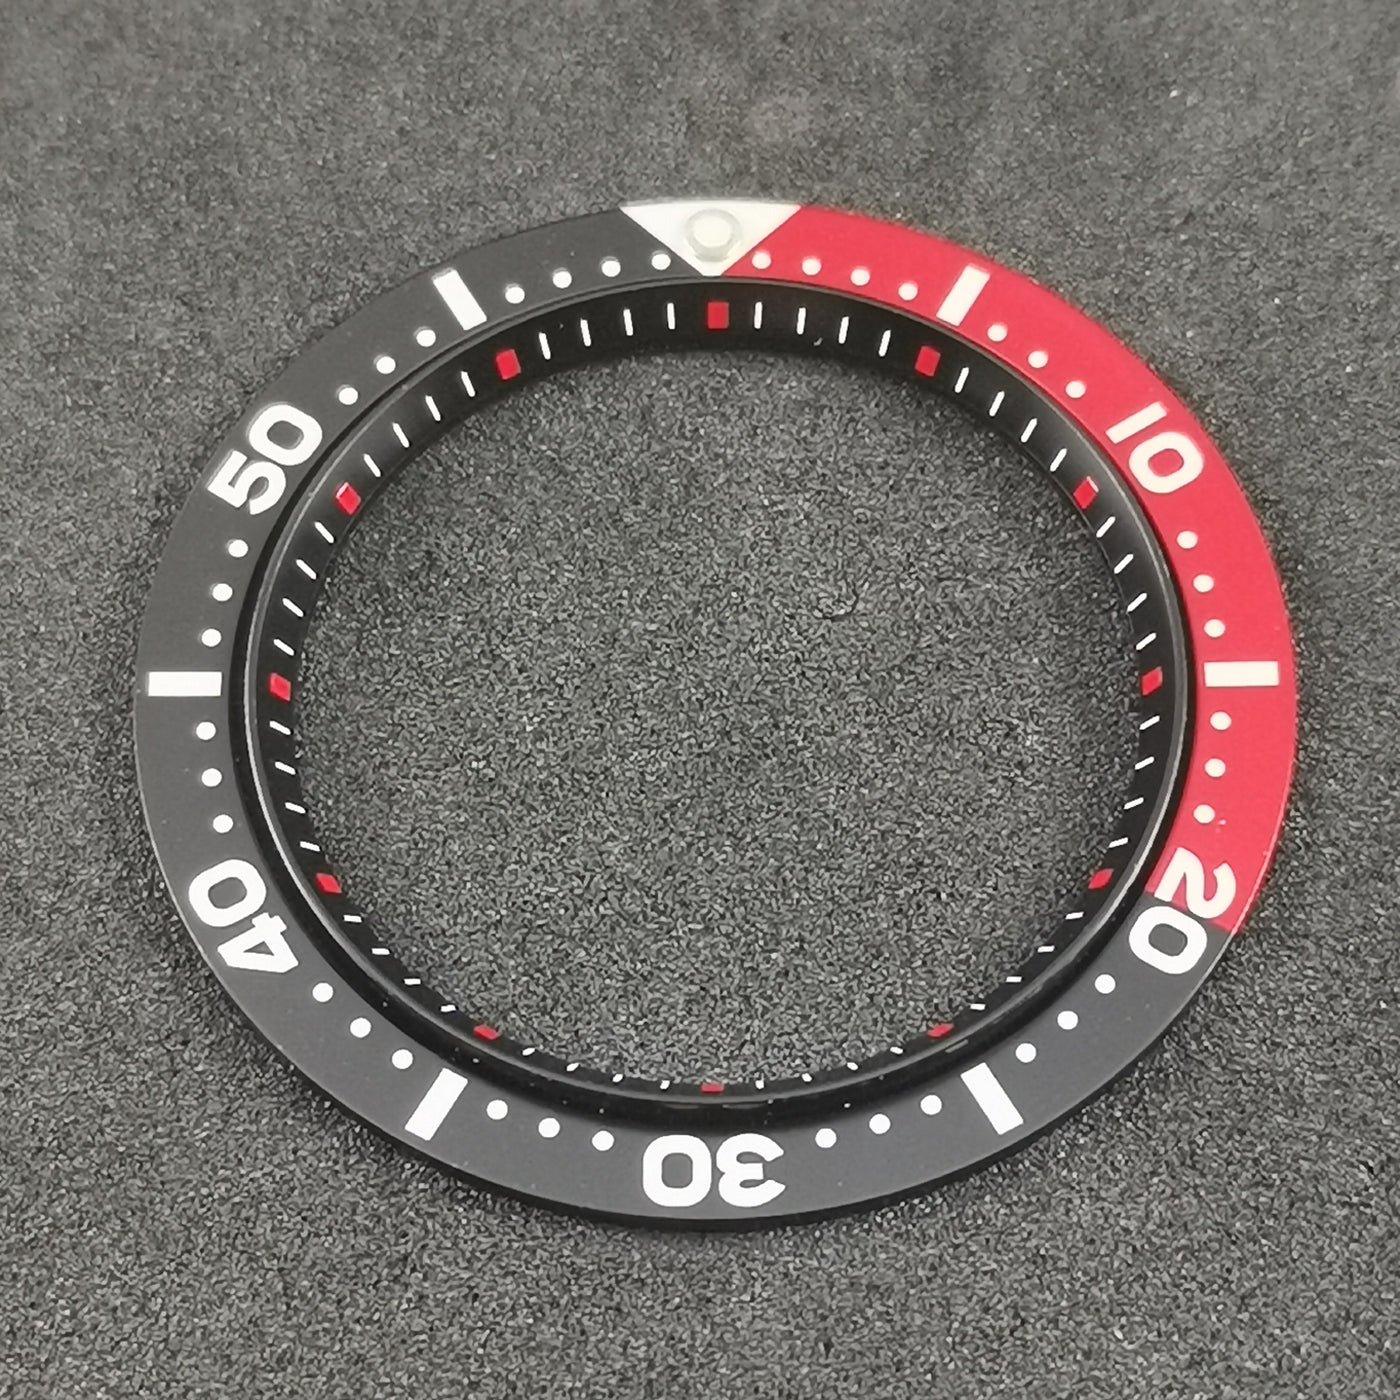 C0195 SKX007 Chapter Ring-Black with Red Marker